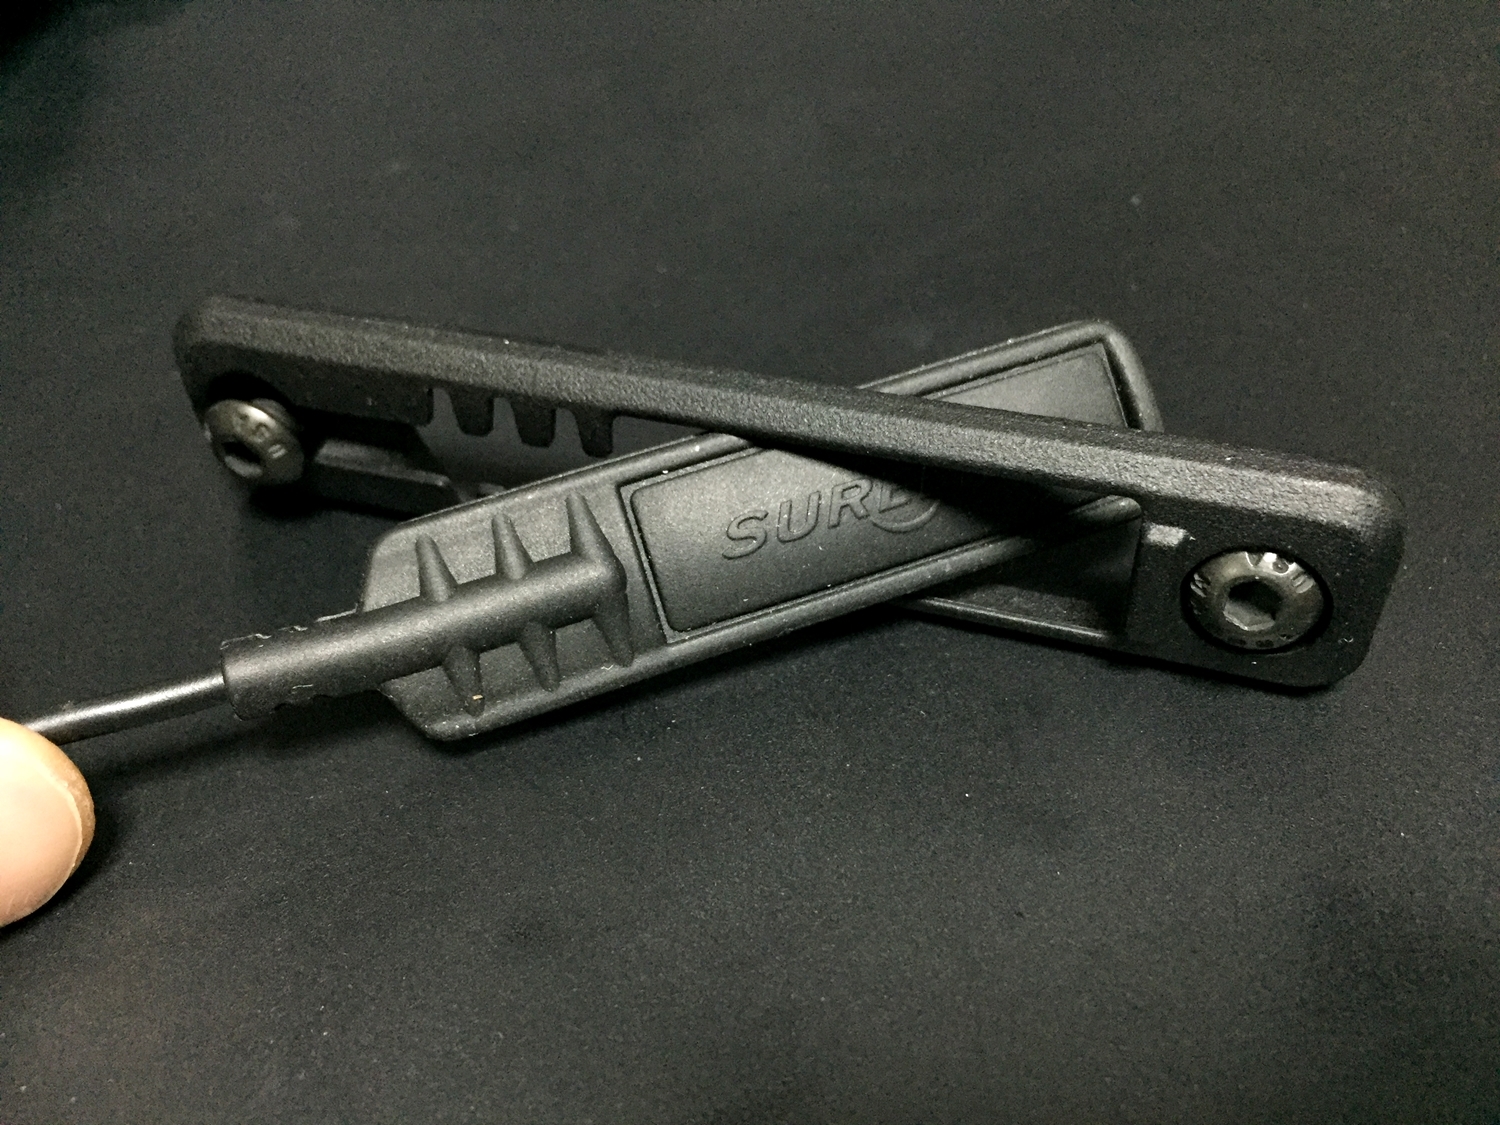 11 M-LOK MAGPUL Tape Switch Mounting Plate for Surefire ST Polymer MADE IN USA マグプル 実物 本家 テープ リモート スイッチ